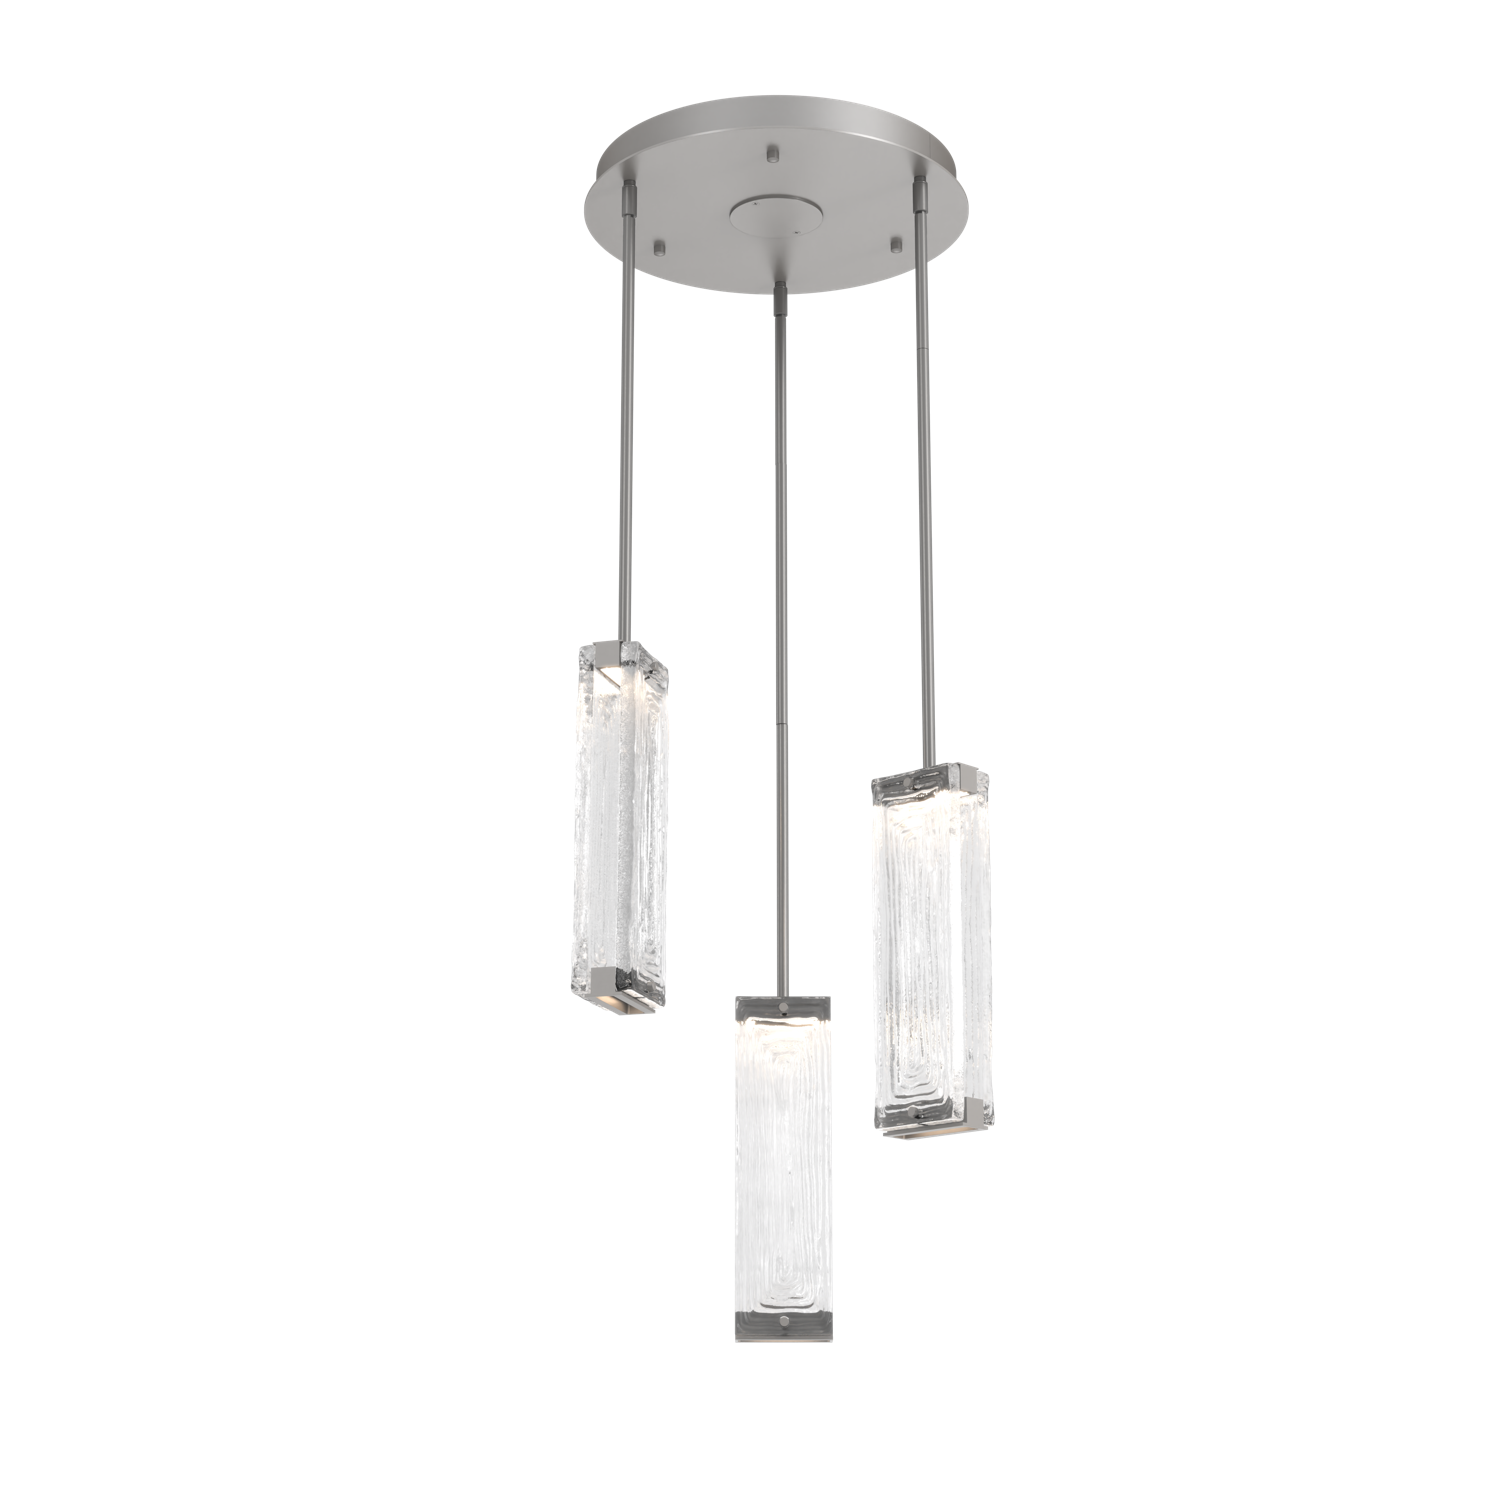 CHB0090-03-BS-TL-Hammerton-Studio-Tabulo-3-light-multi-pendant-chandelier-with-beige-silver-finish-and-clear-linea-cast-glass-shade-and-LED-lamping